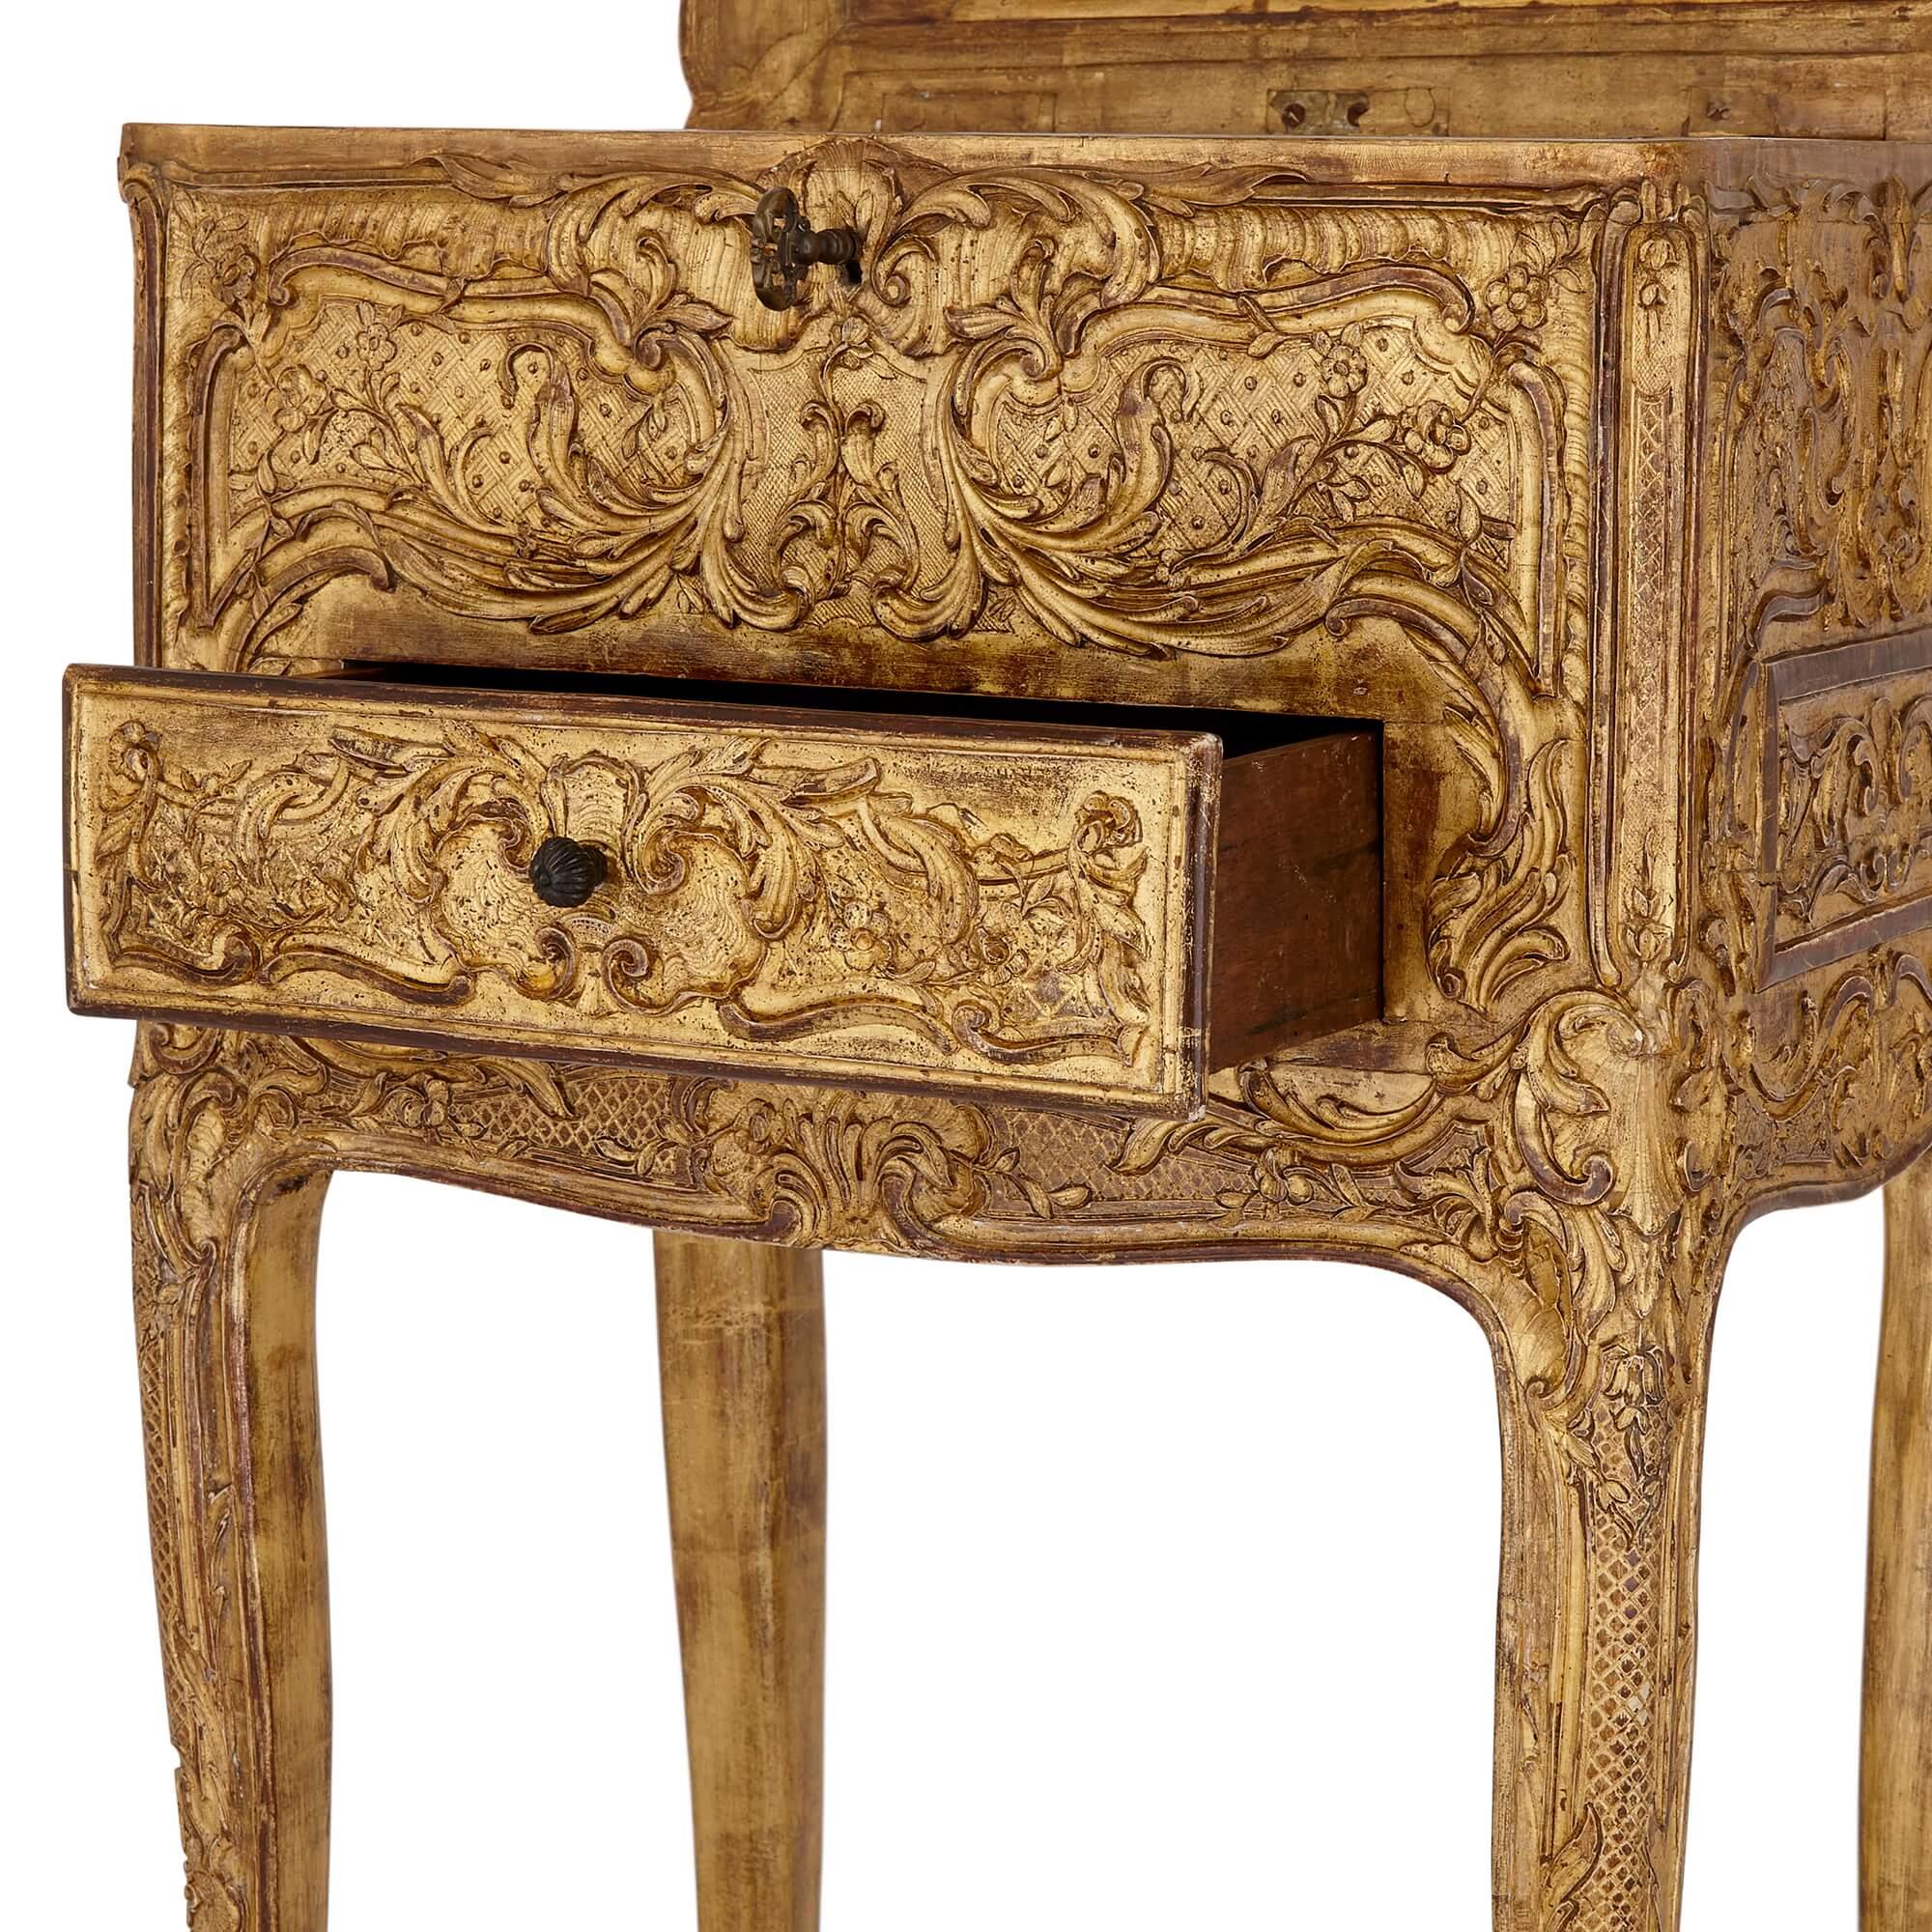 French Régence Period Carved Giltwood Table with Mirror, Early 18th Century For Sale 4